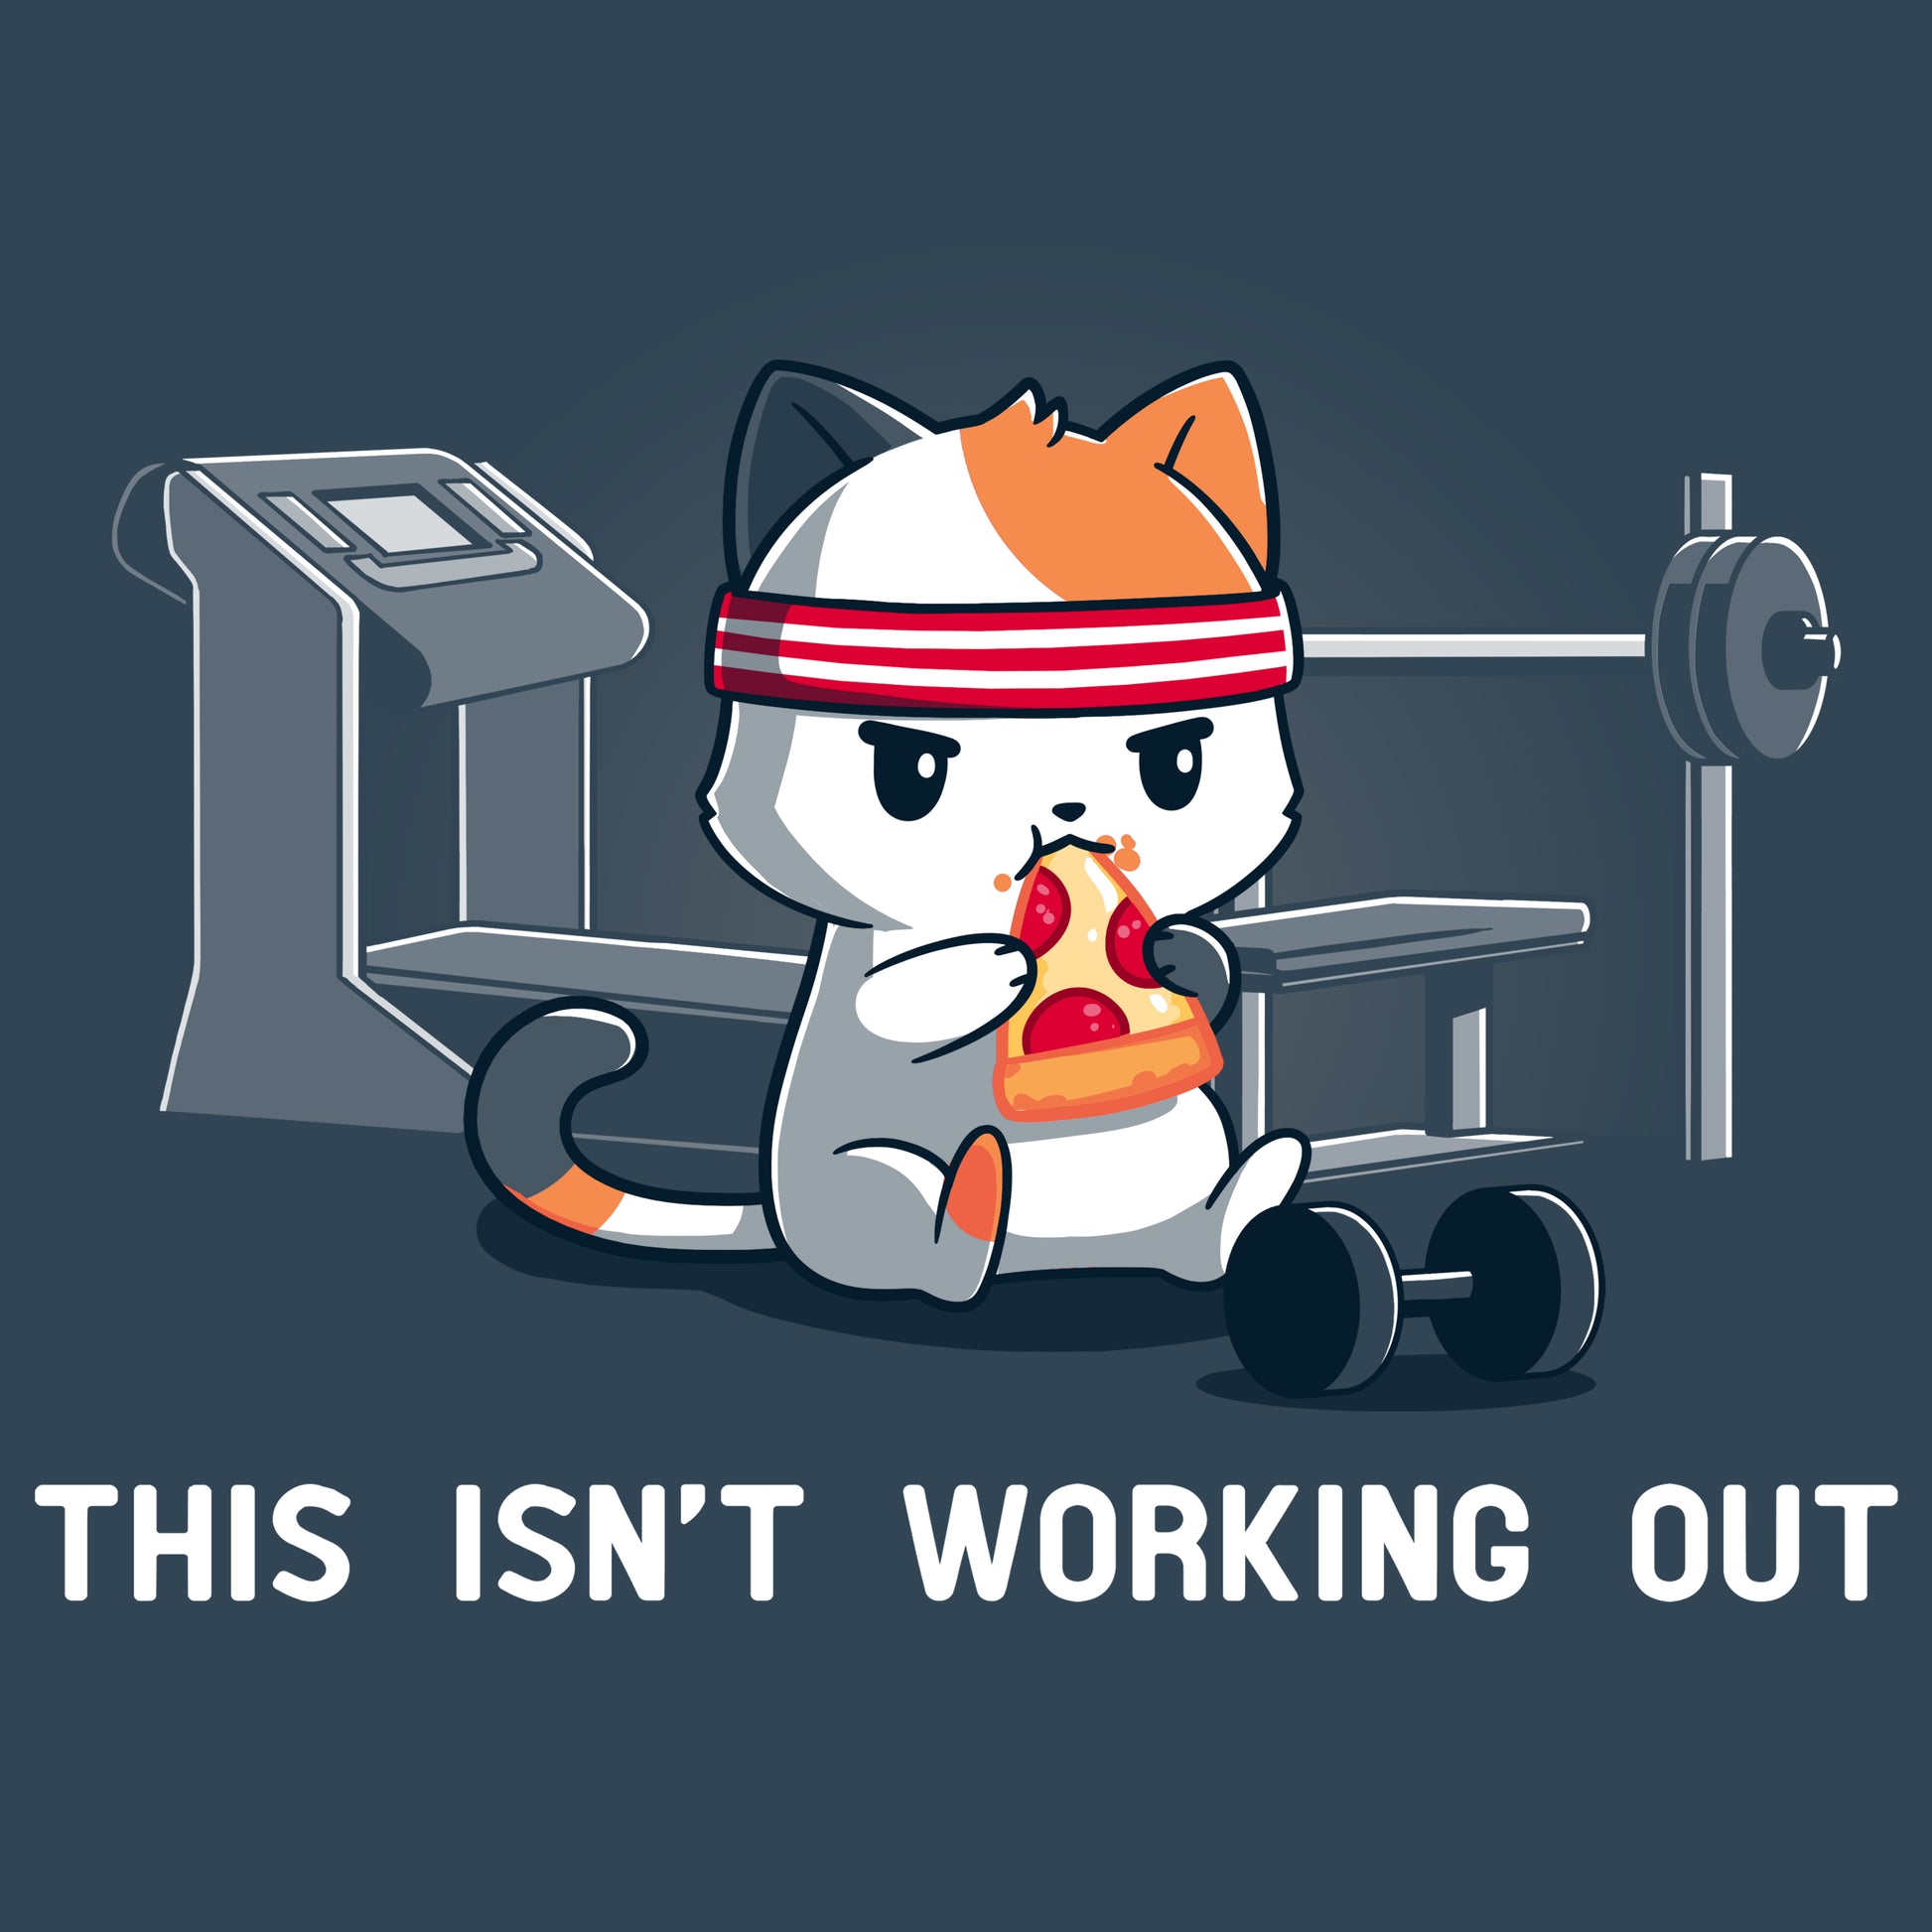 This TeeTurtle workout isn't working out.